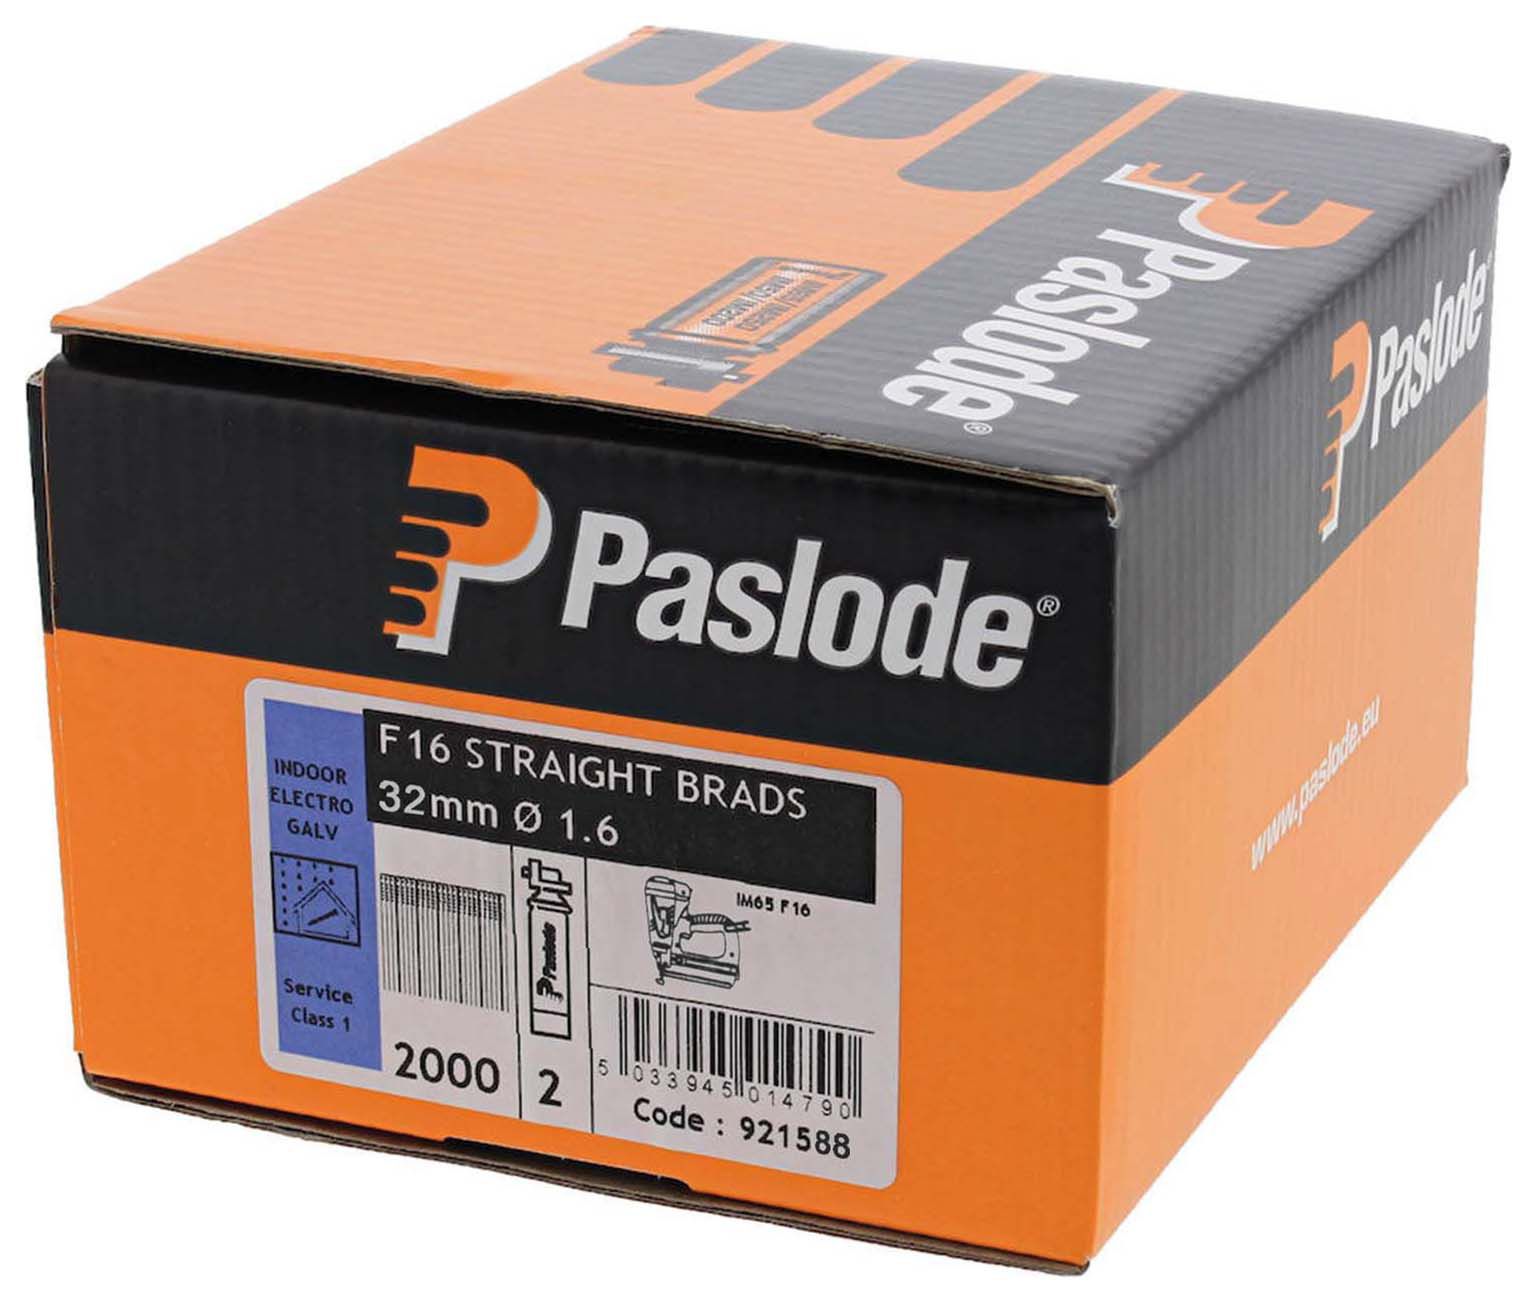 Paslode 141267 3.1mm x 90mm Hot Dipped Galvanised Collated Box of 1100 Nails + 1 Fuel Cell